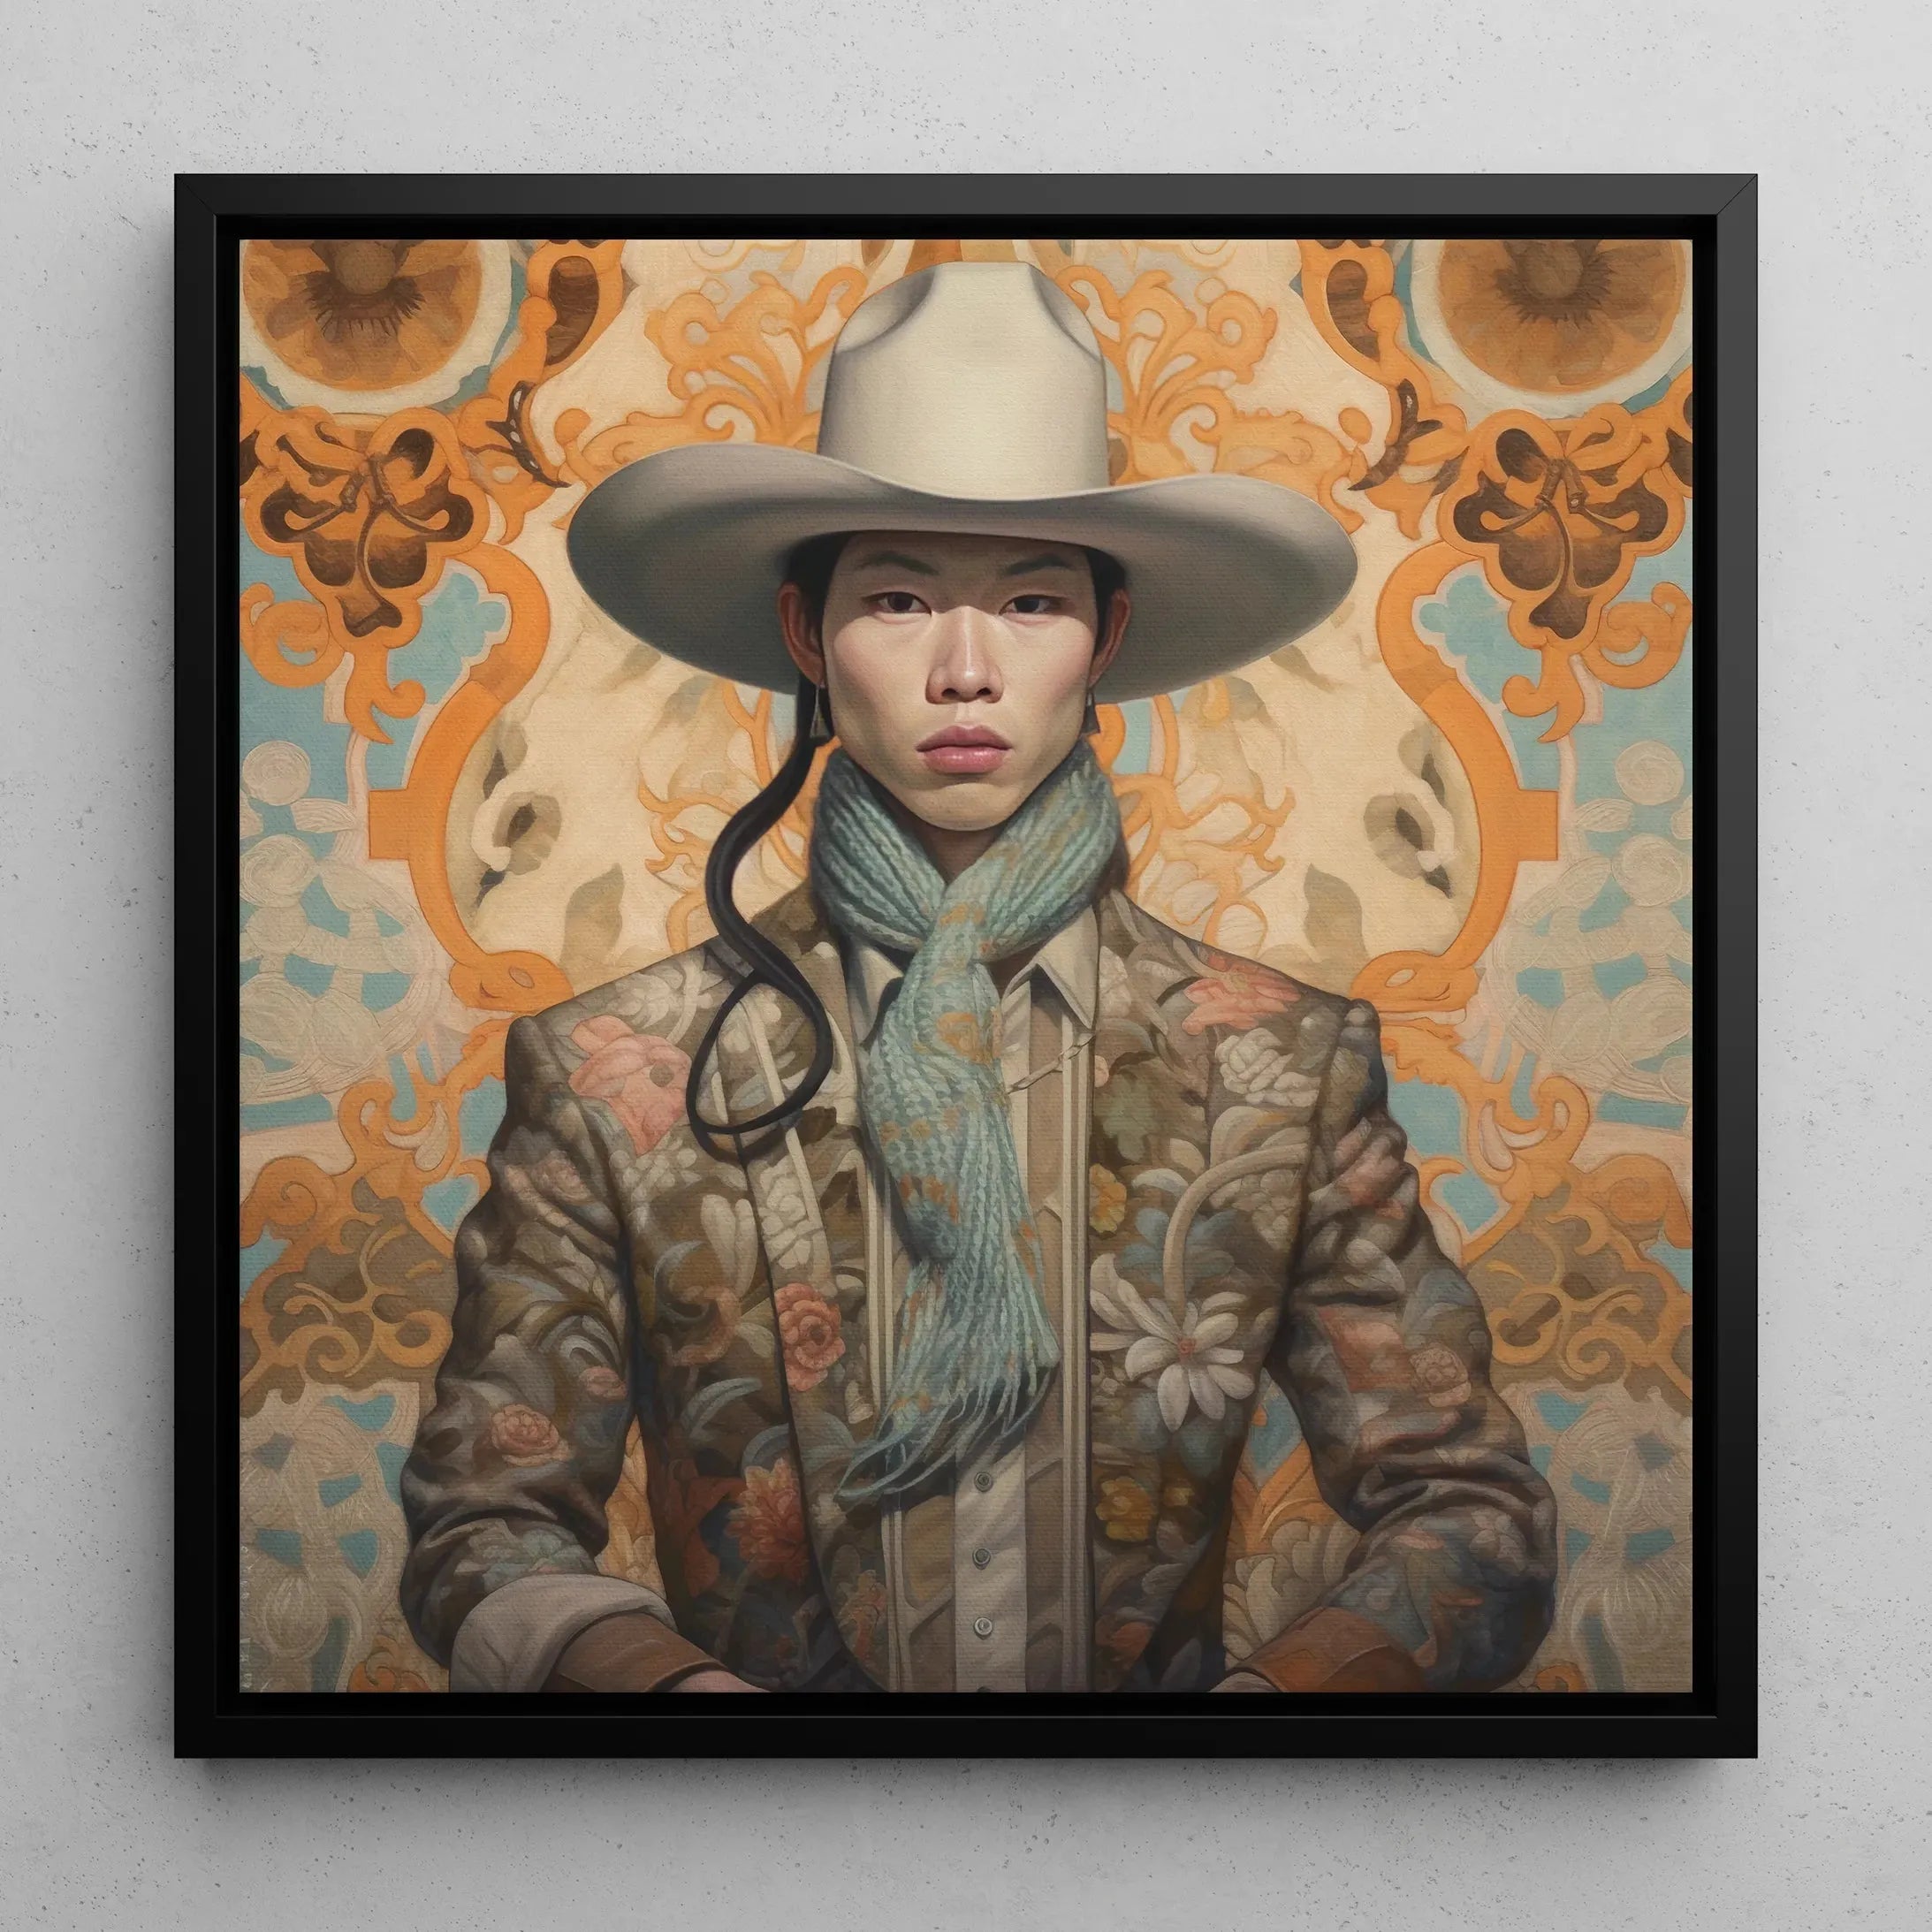 Baihu - Gay Chinese Cowboy Framed Canvas - Gaysian Queerart - 16’x16’ - Posters Prints & Visual Artwork - Aesthetic Art